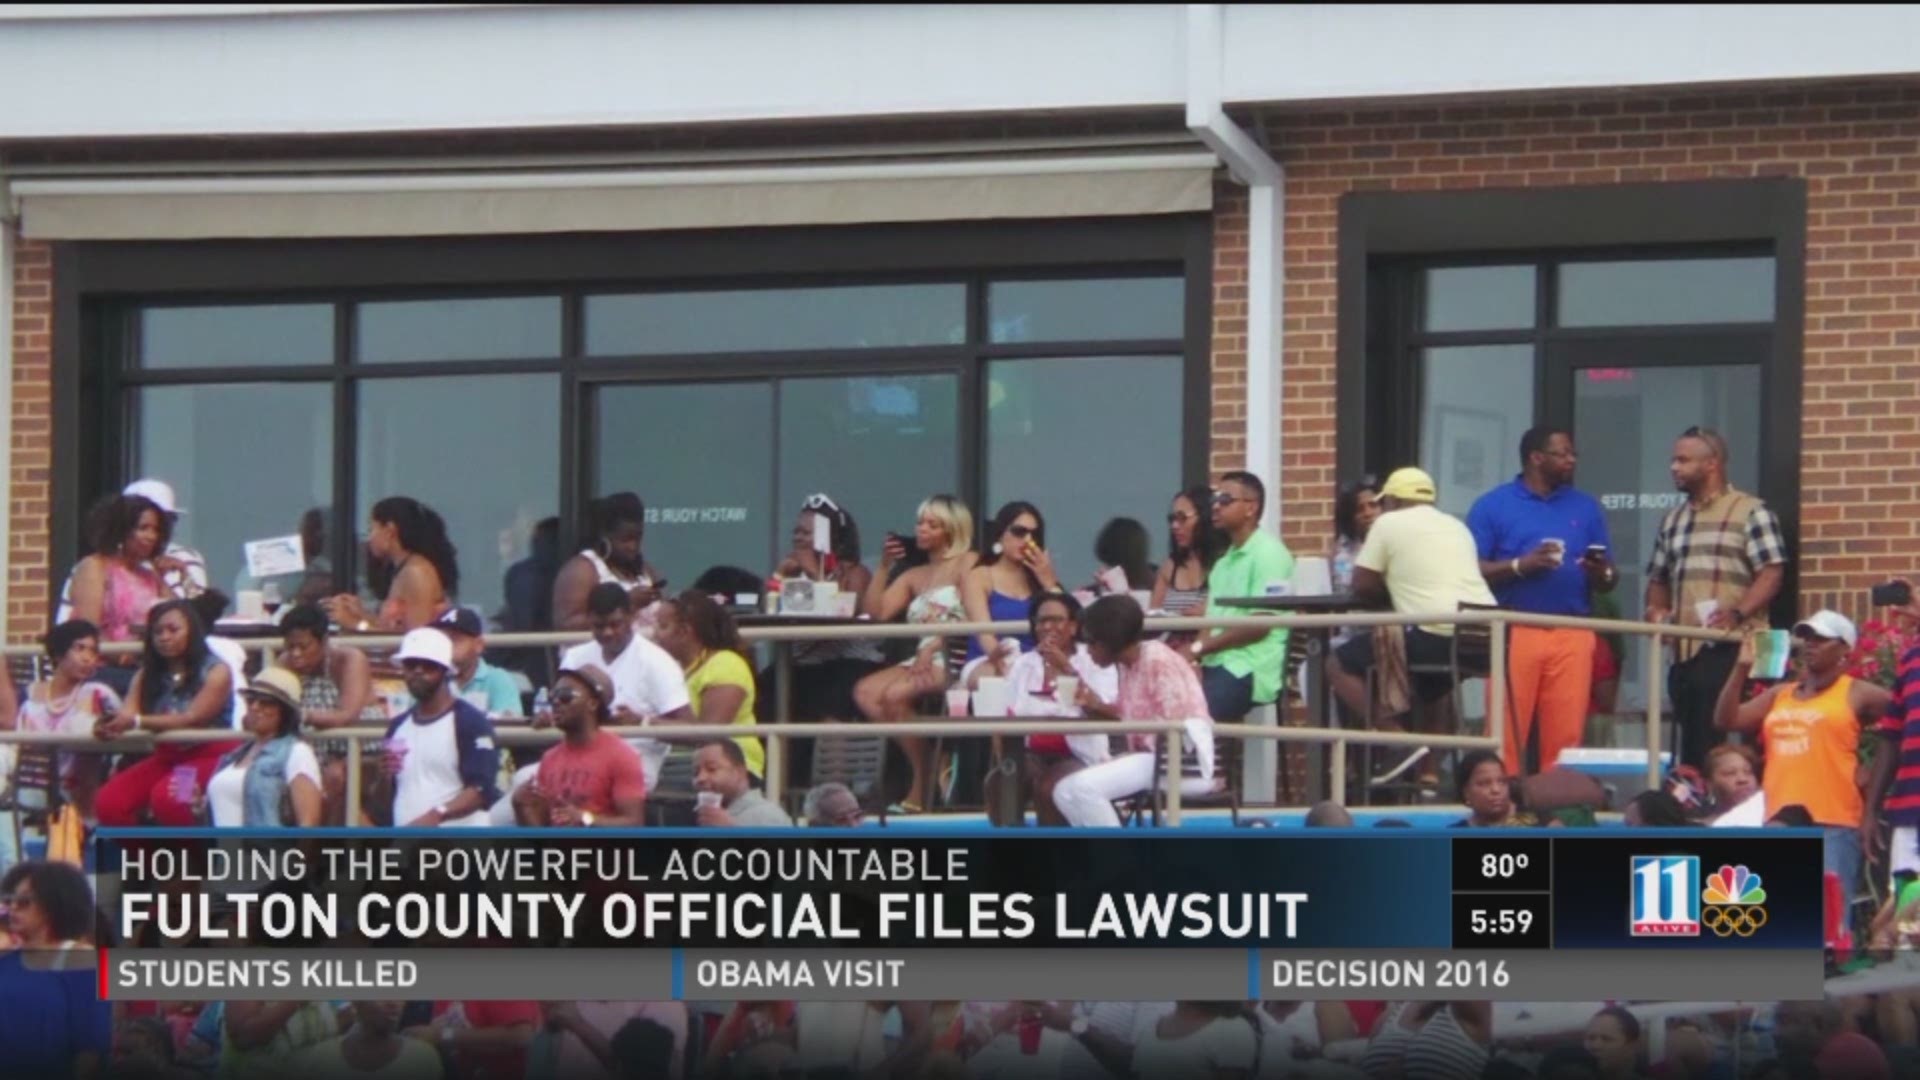 Whistleblower lawsuit filed against Fulton County Commissioner